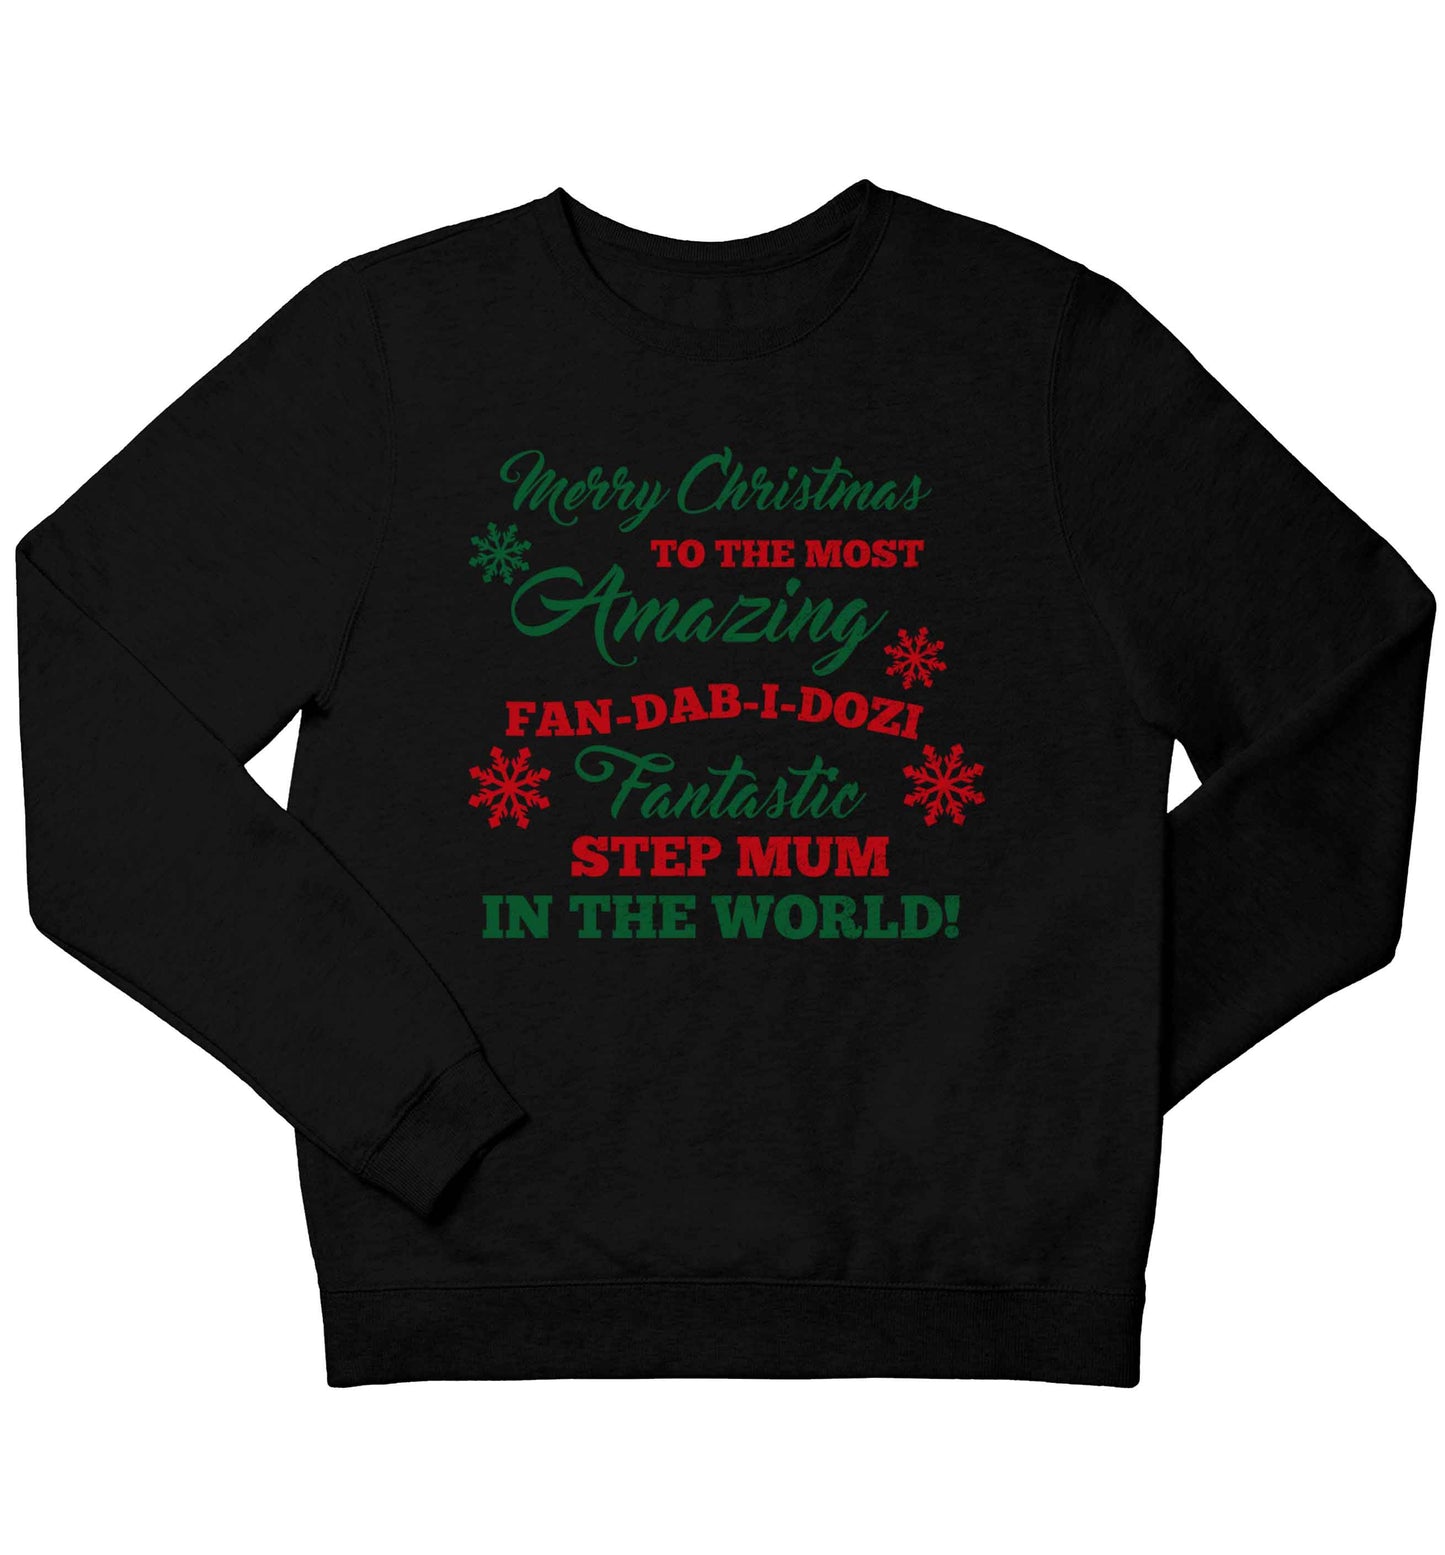 Merry Christmas to the most amazing fan-dab-i-dozi fantasic Step Mum in the world children's black sweater 12-13 Years